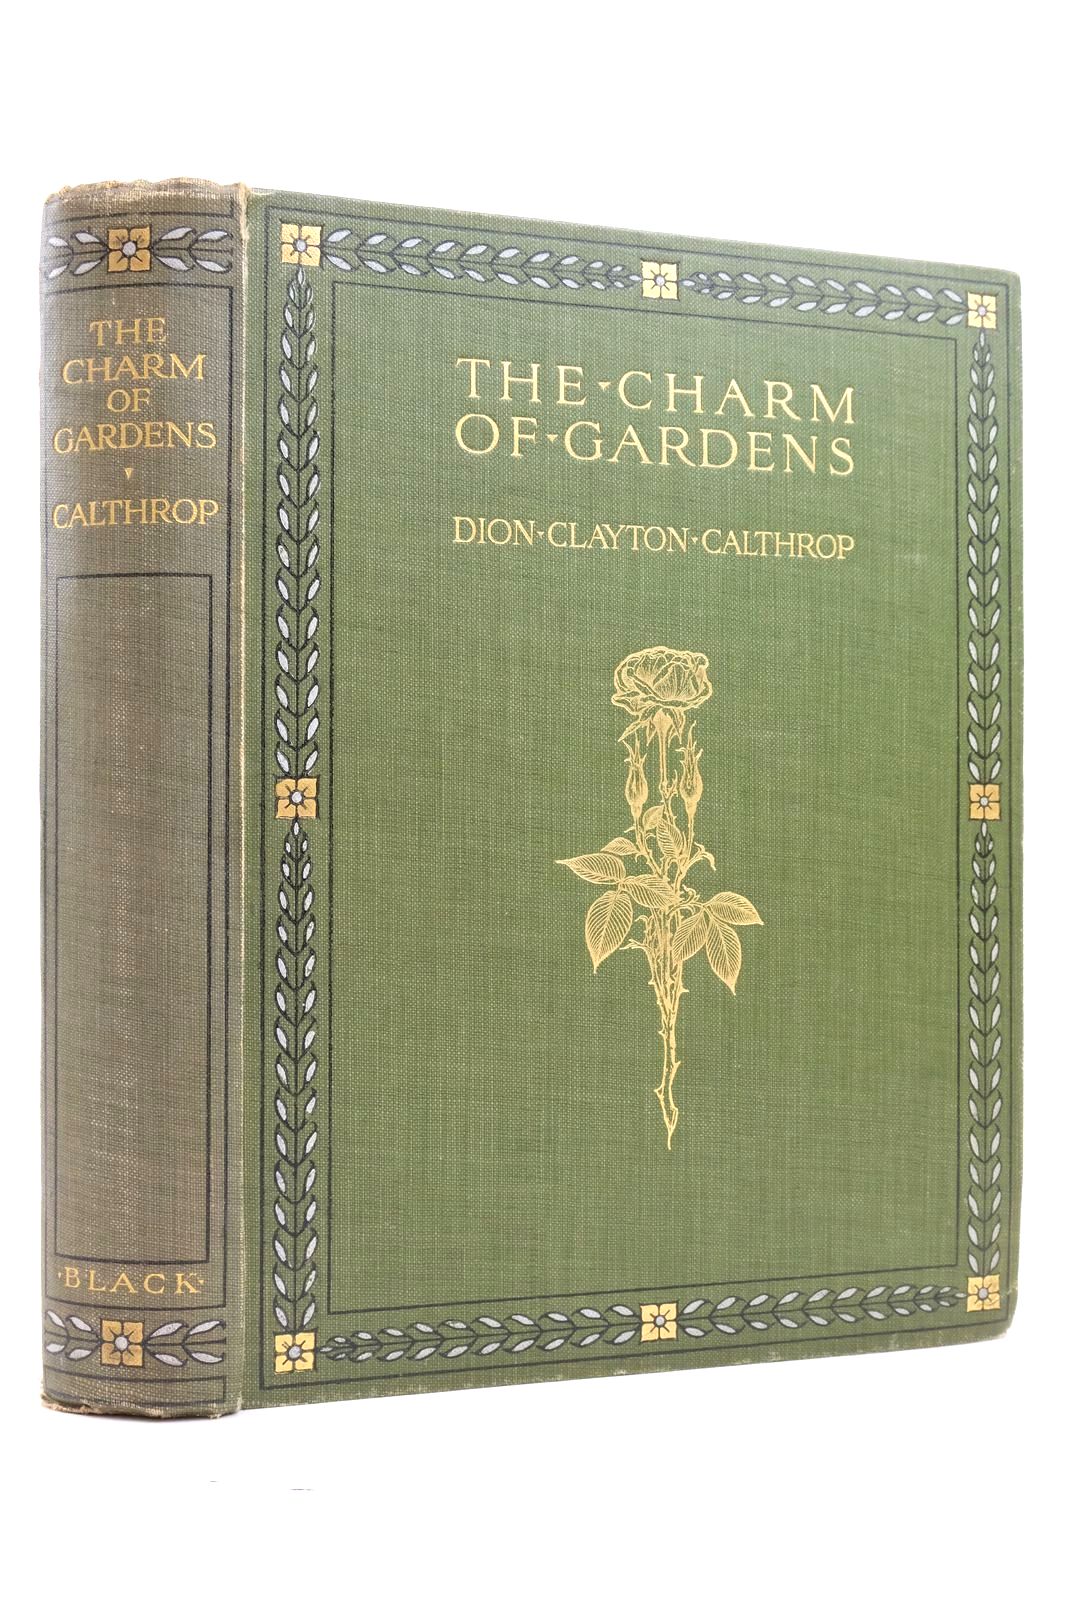 Photo of THE CHARM OF GARDENS written by Calthrop, Dion Clayton published by Adam & Charles Black (STOCK CODE: 2137469)  for sale by Stella & Rose's Books